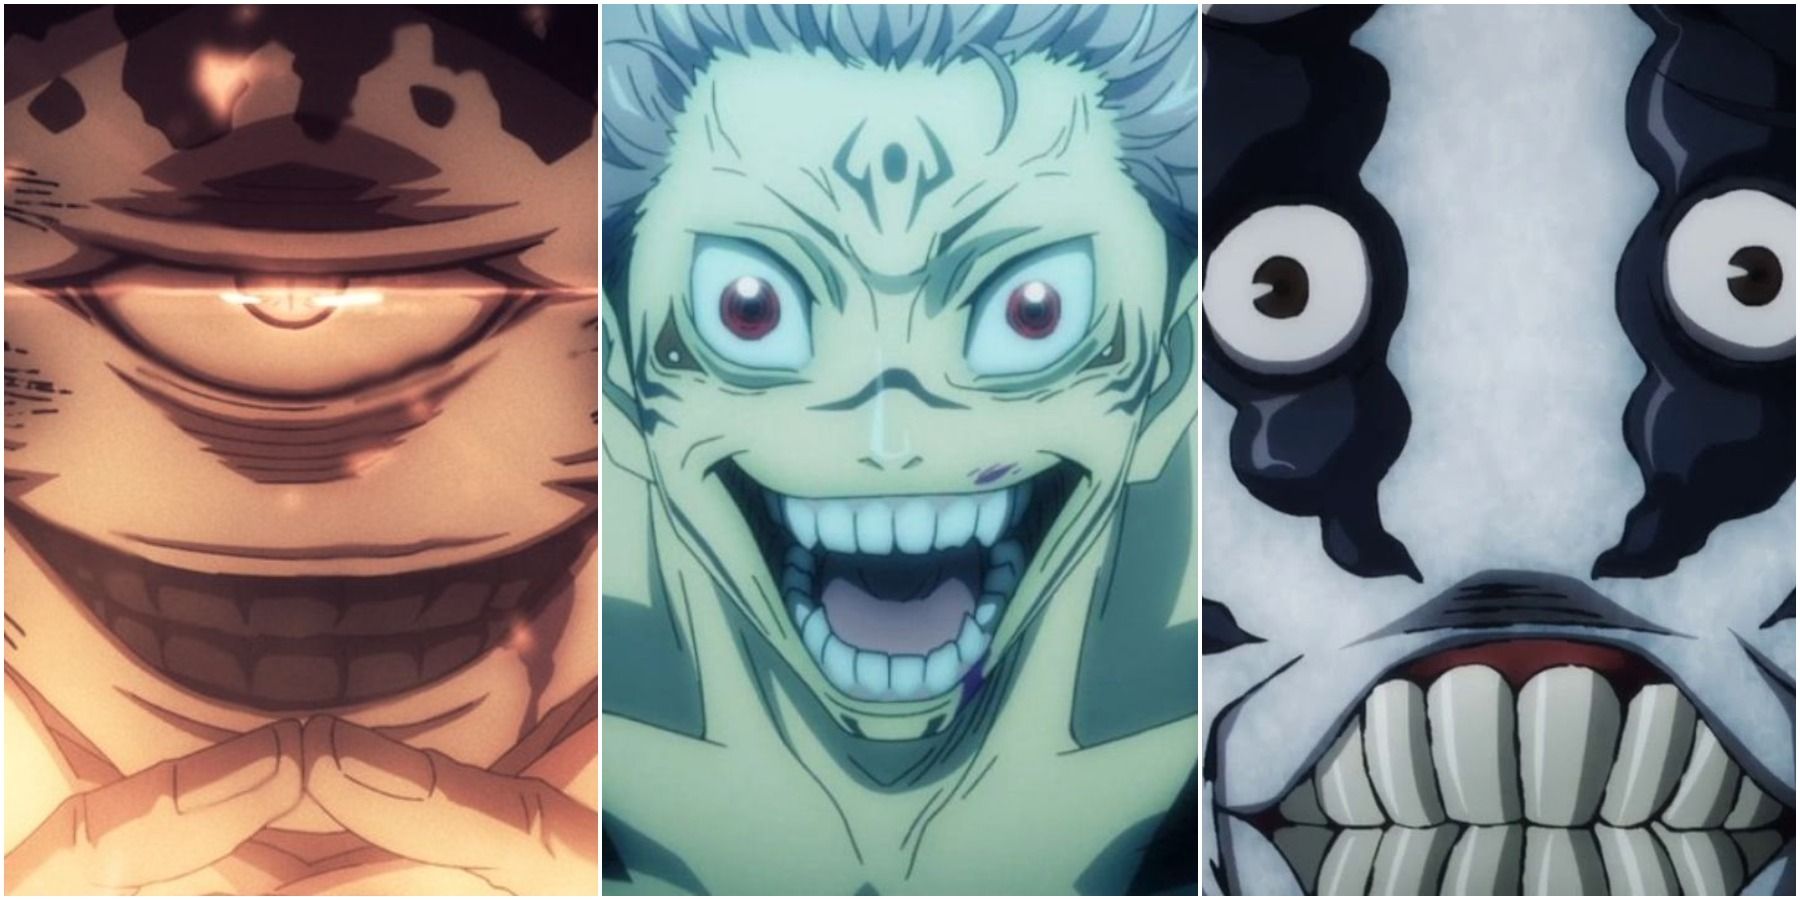 Three Special Grade Curses, including Sukuna, the most powerful, appearing in Jujutsu Kaisen